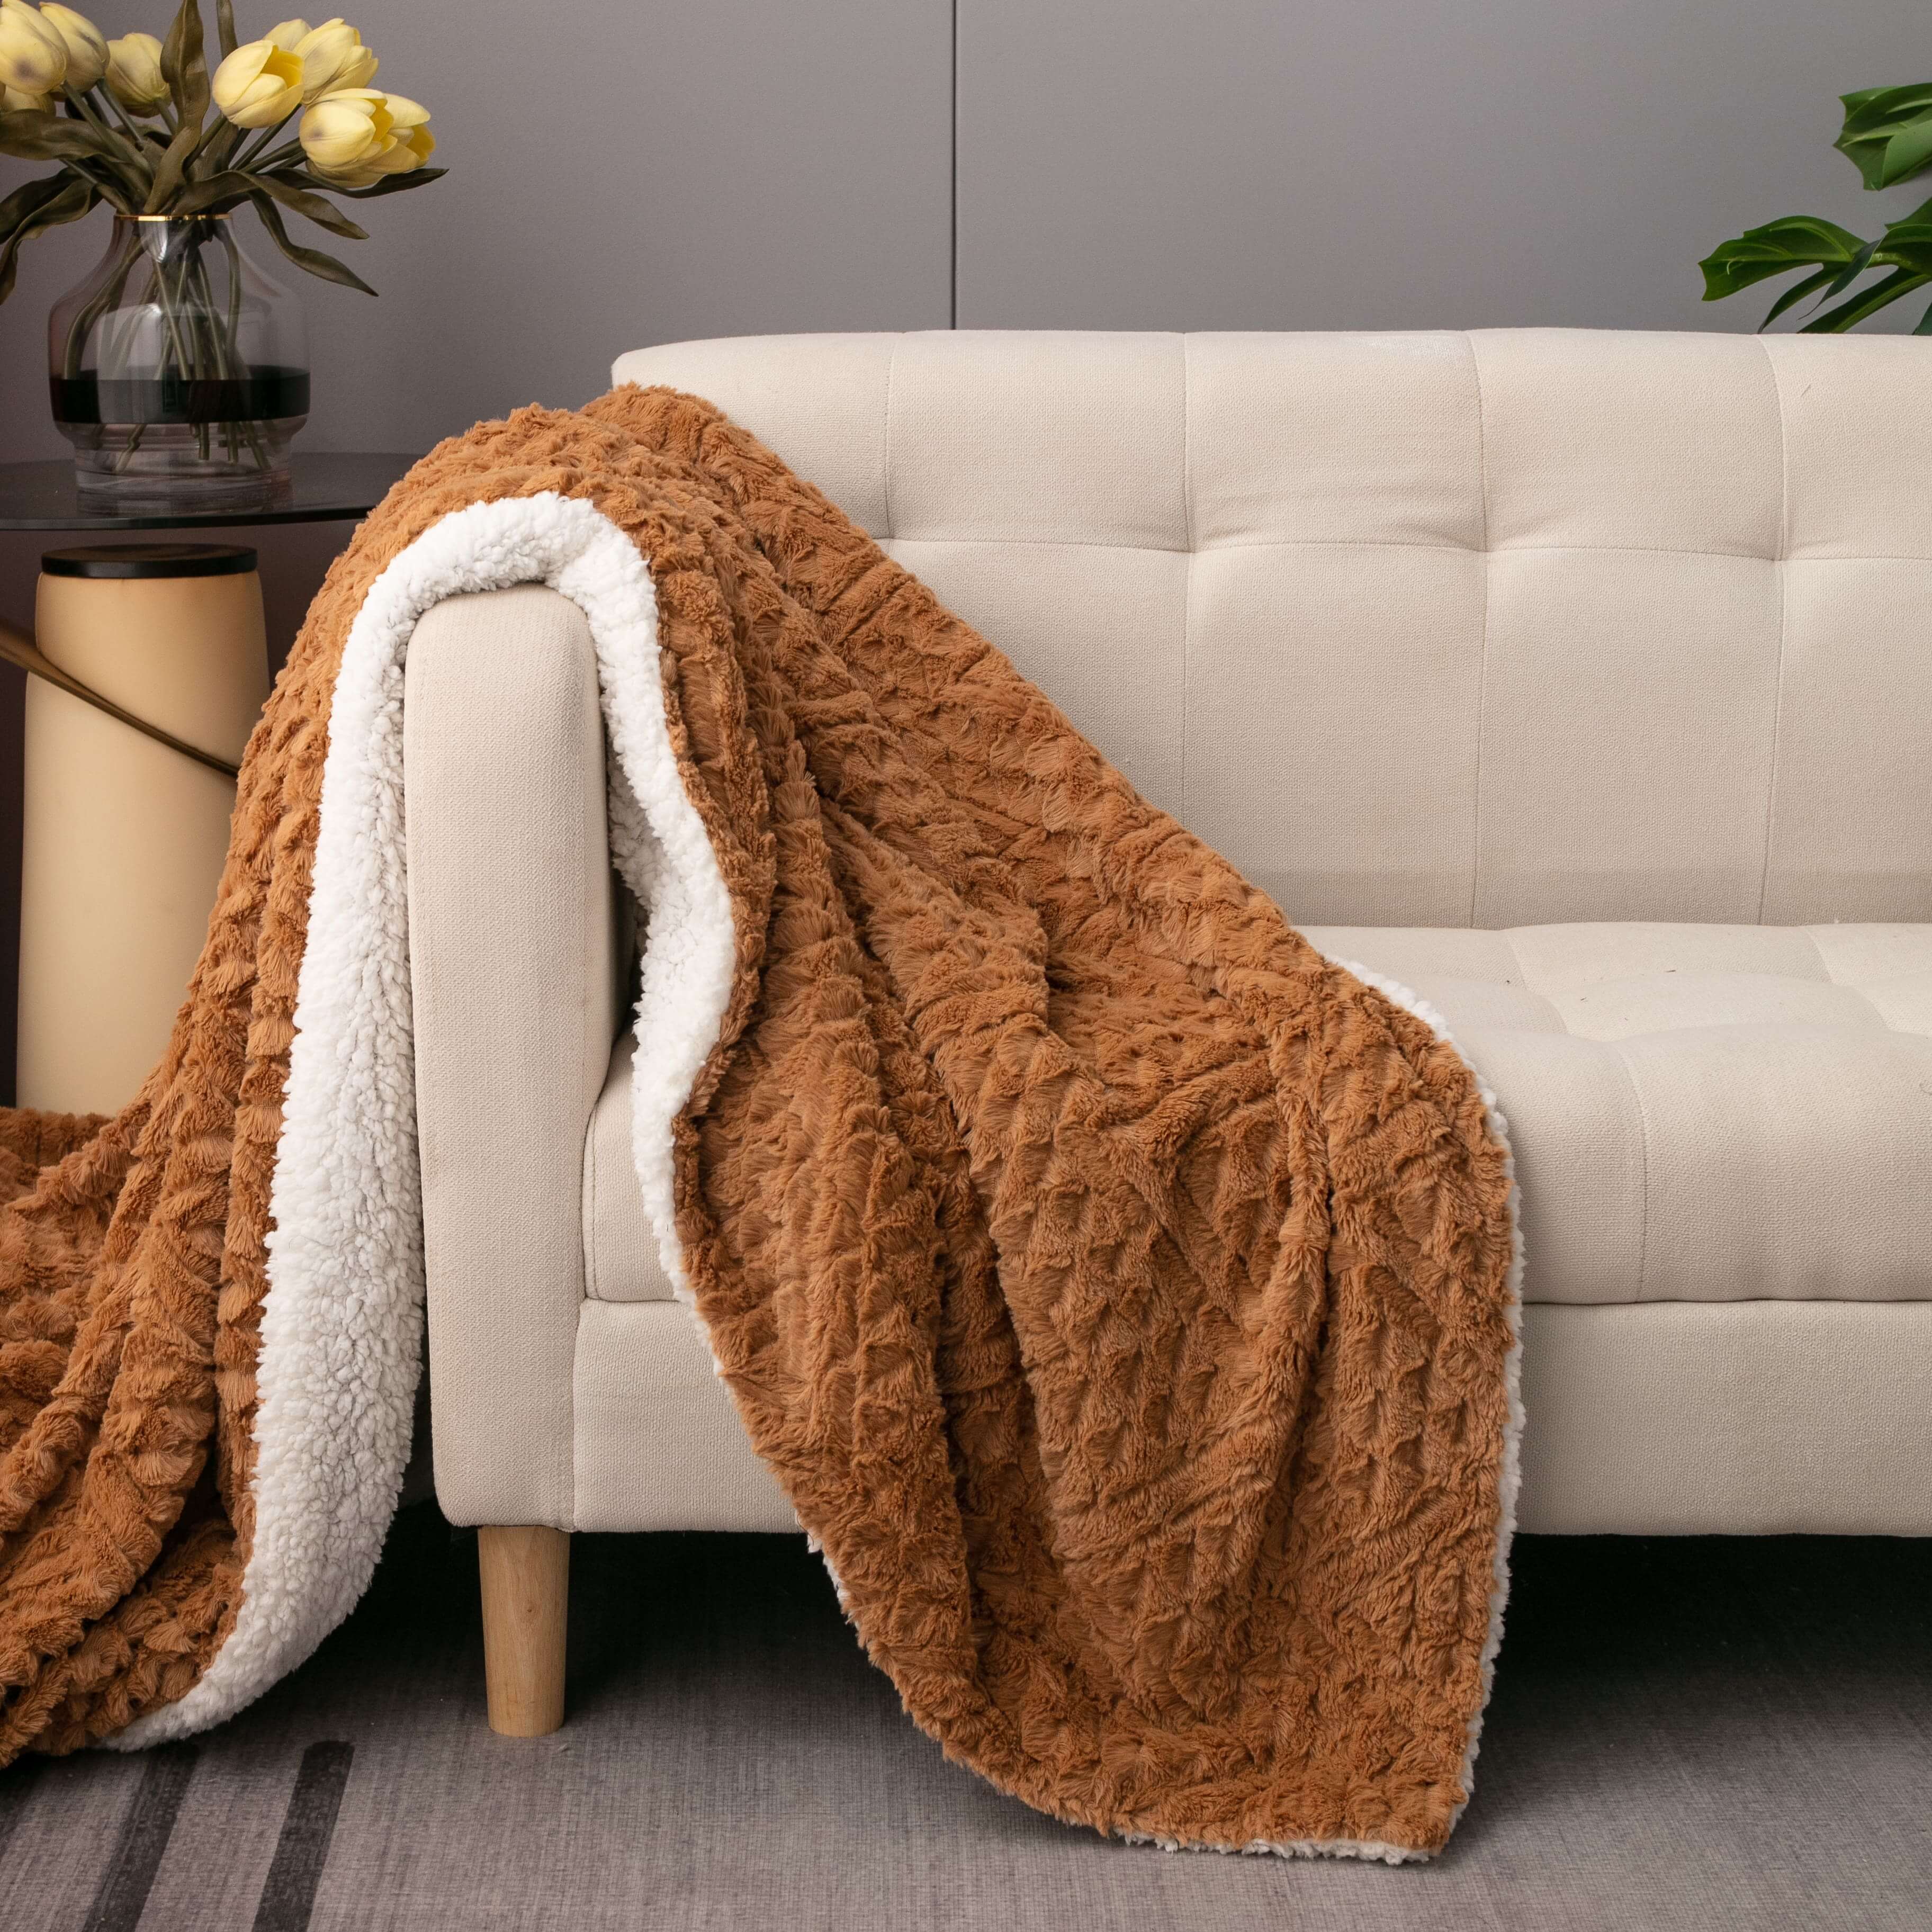 cozy brown faux fur sherpa throw blanket on casual living room couch. click to view all blankets